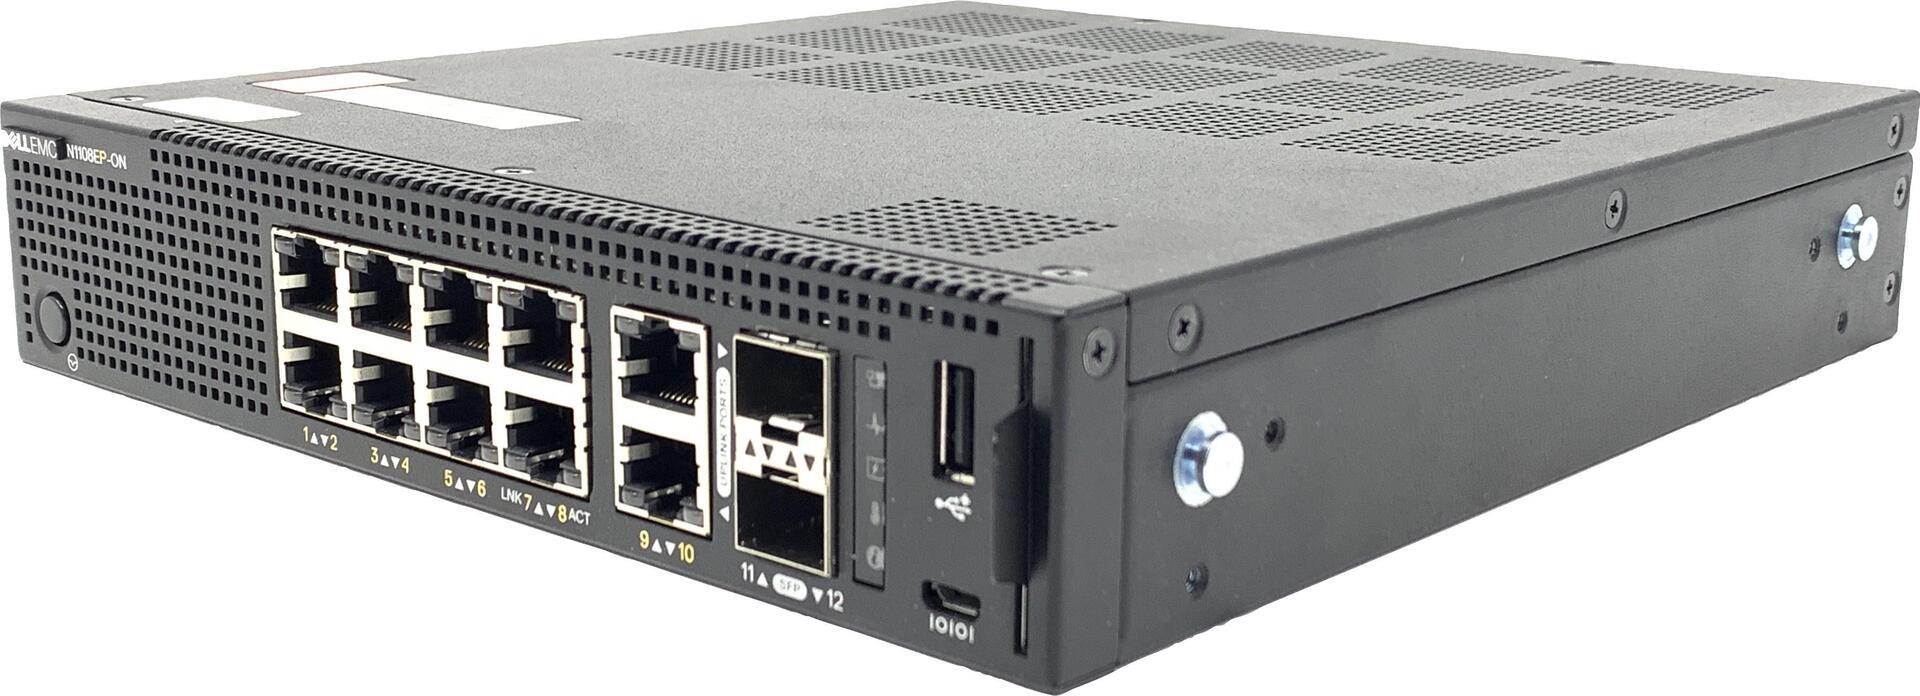 Dell EMC Networking N1108EP-ON (210-ARUK)